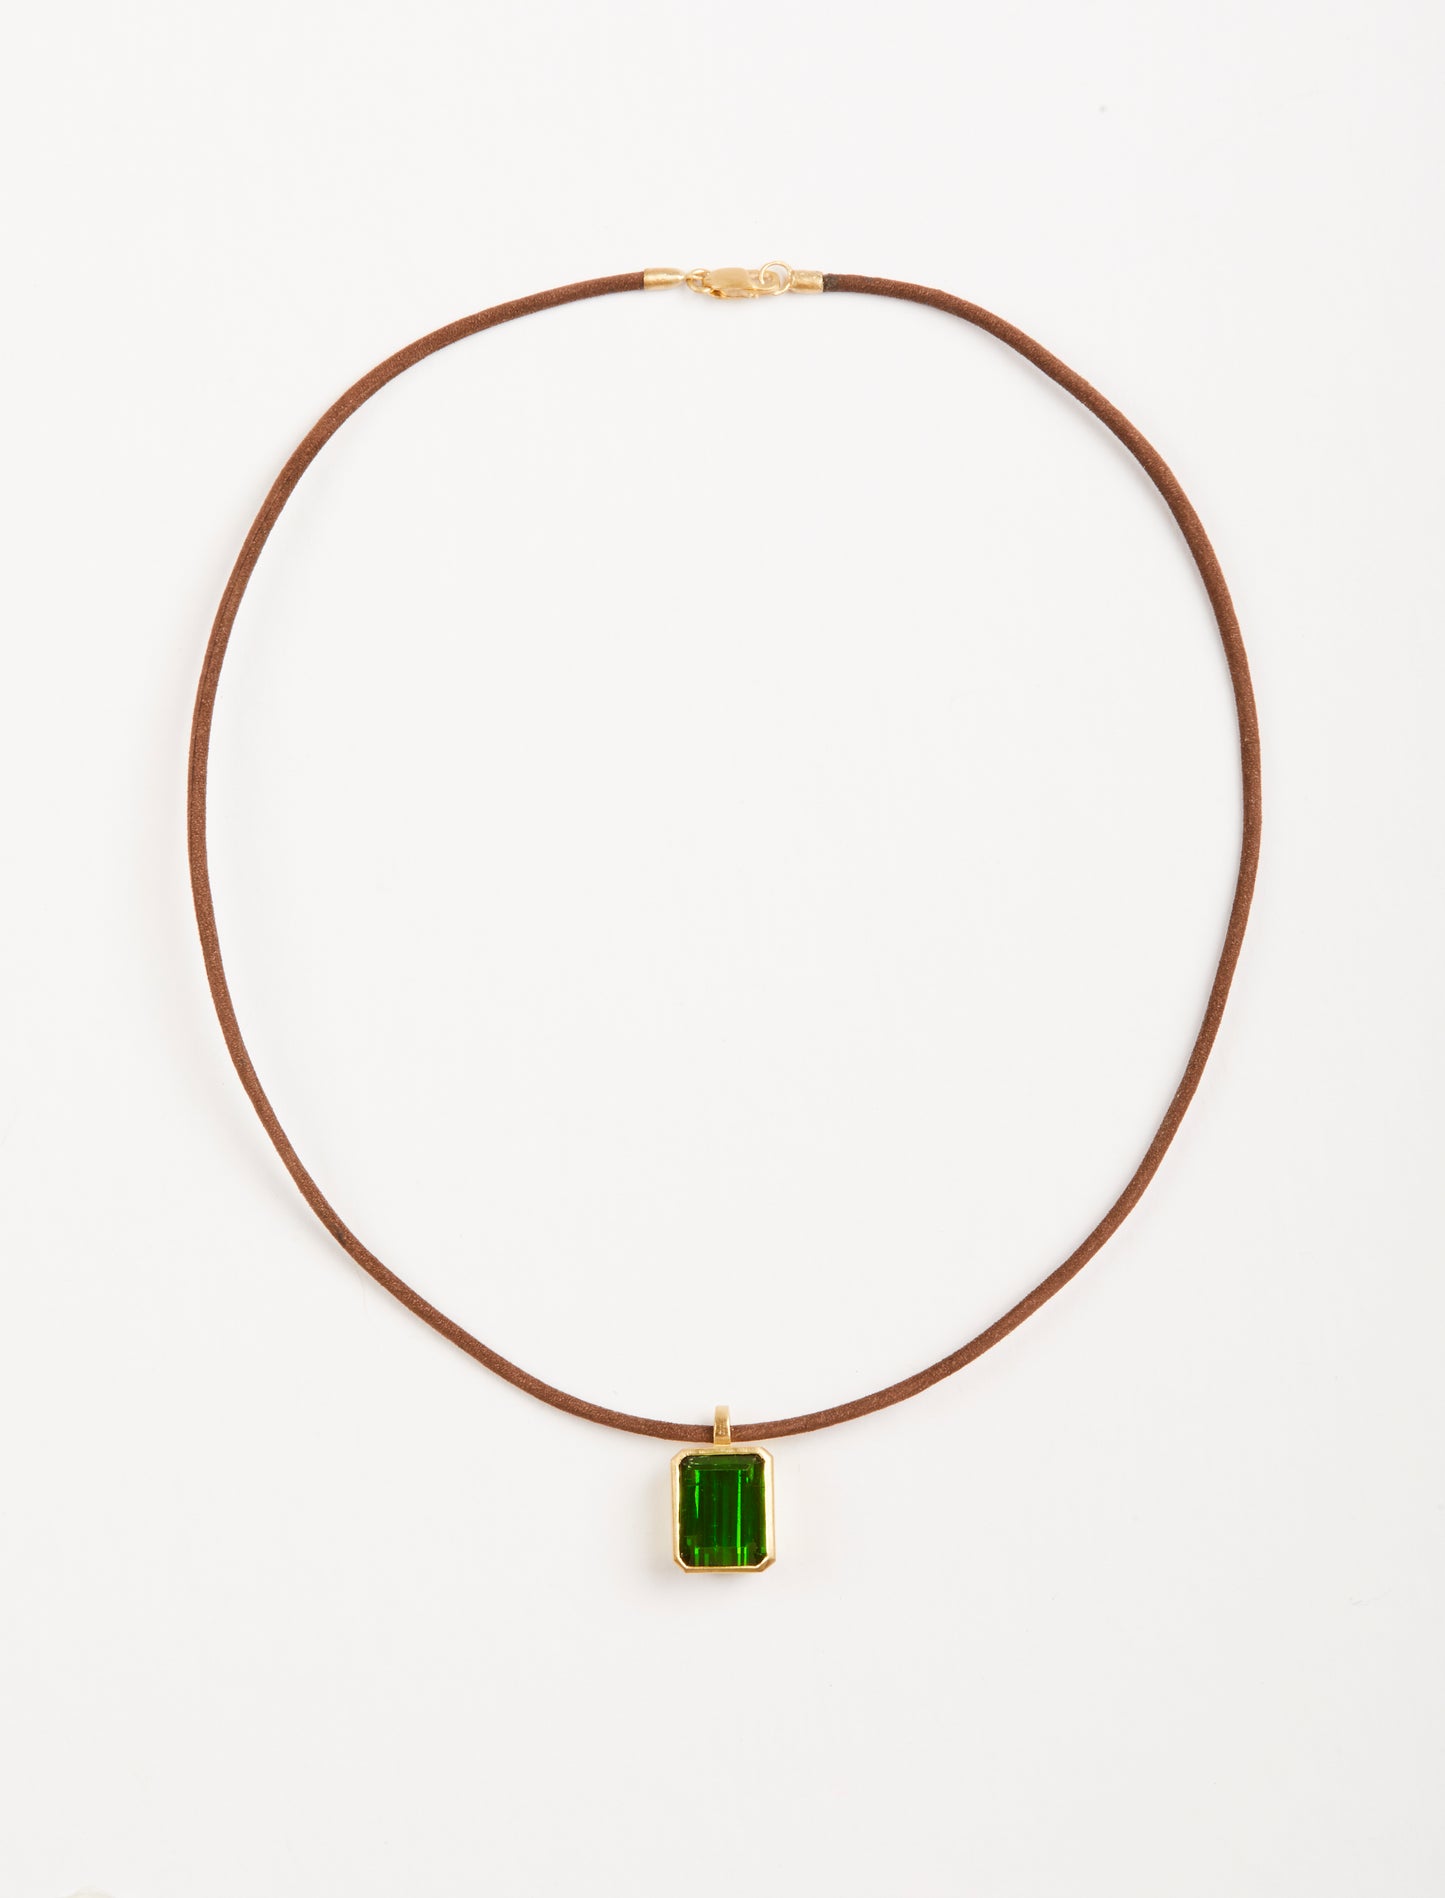 Brown Cord with Green Tourmaline